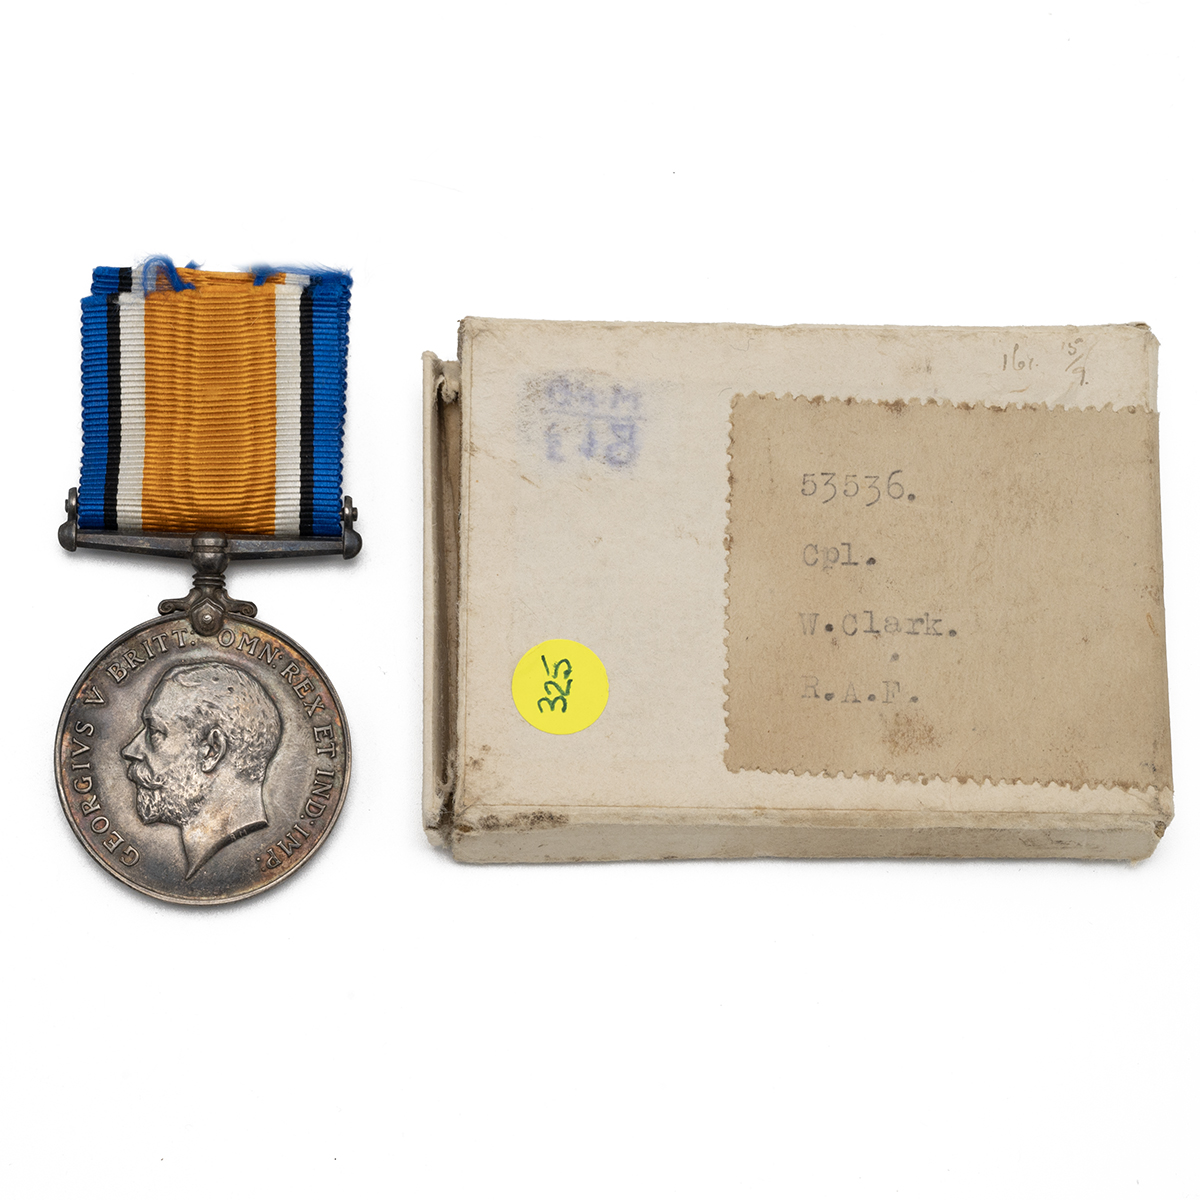 British War Medal 1914-1920 of 53536 Corporal Wilfred Clark R.A.F. Sold with a box.

Enlisted on ...